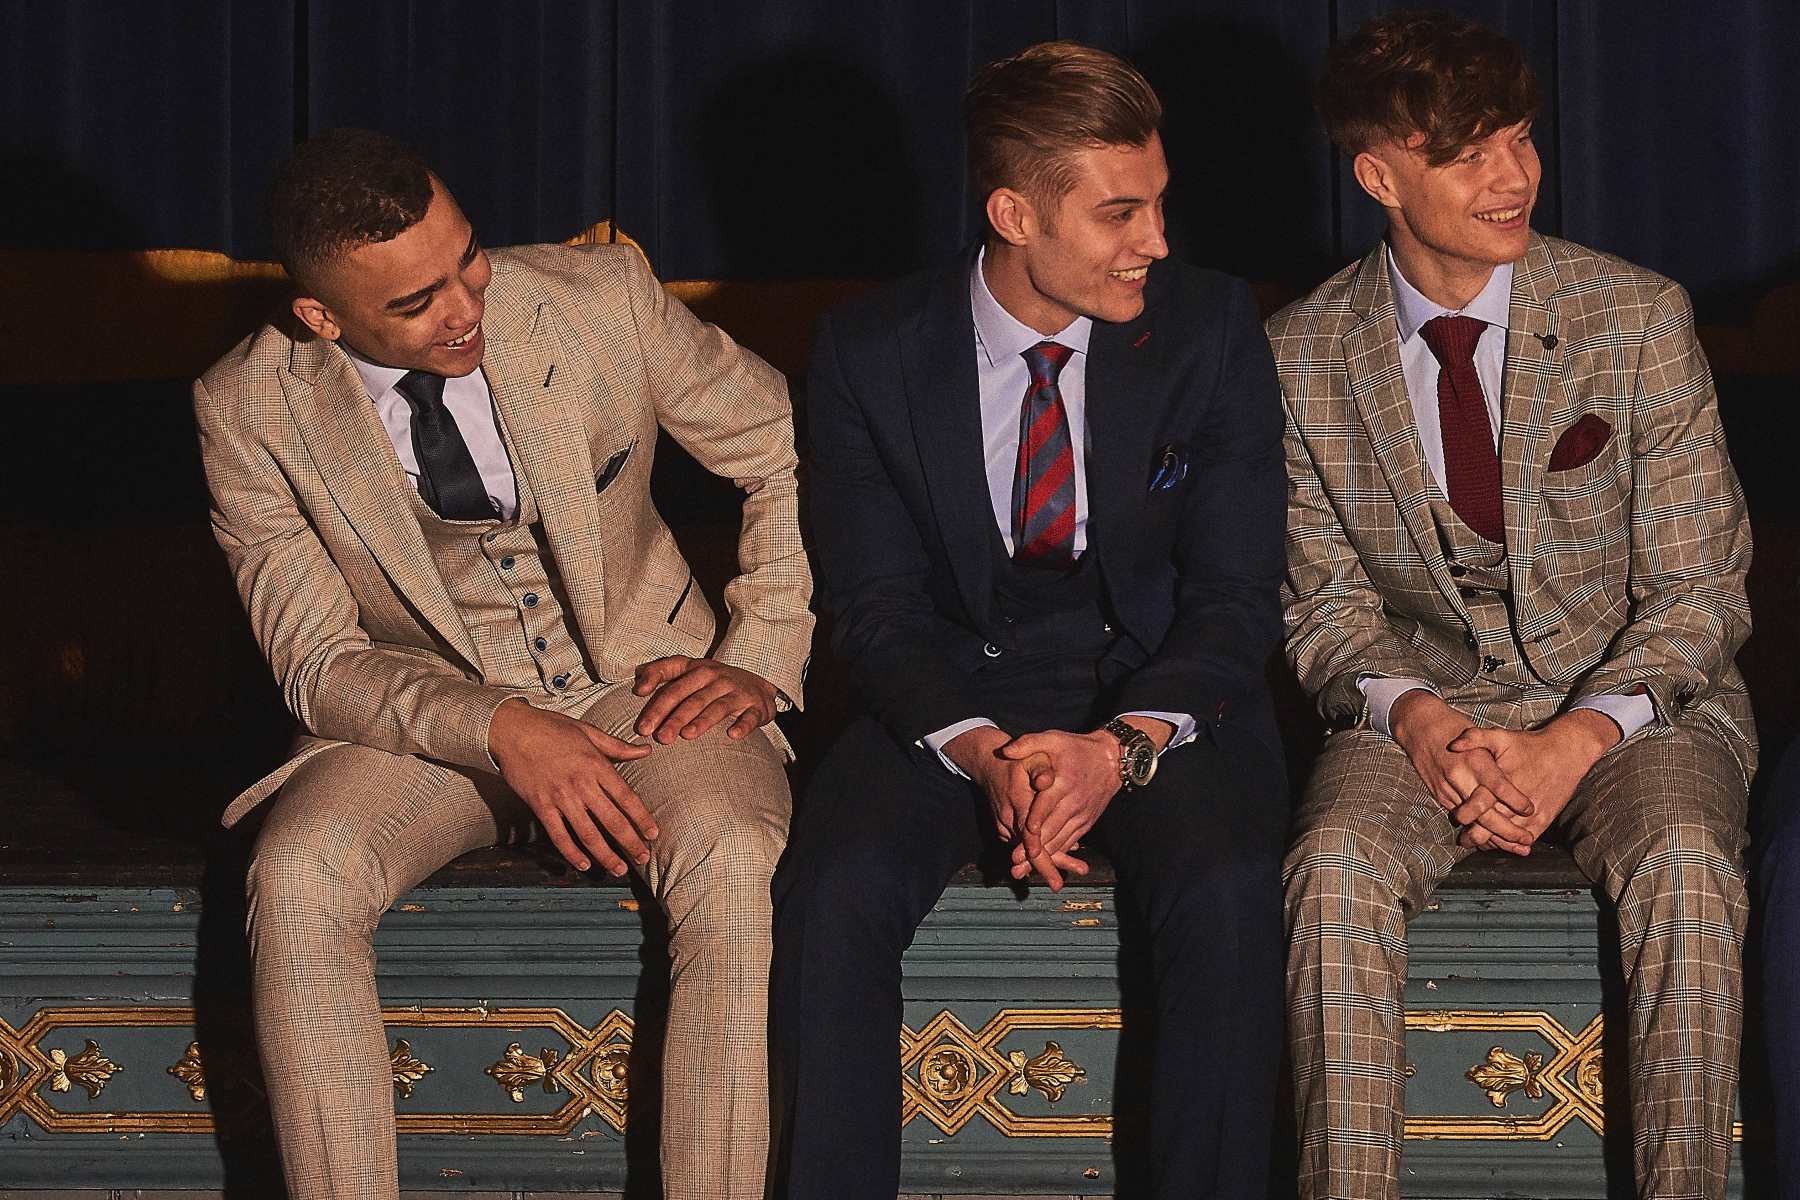 The Ultimate Guide To Suit Shopping For Prom: How To Find The Perfect Suit Without Breaking The Bank